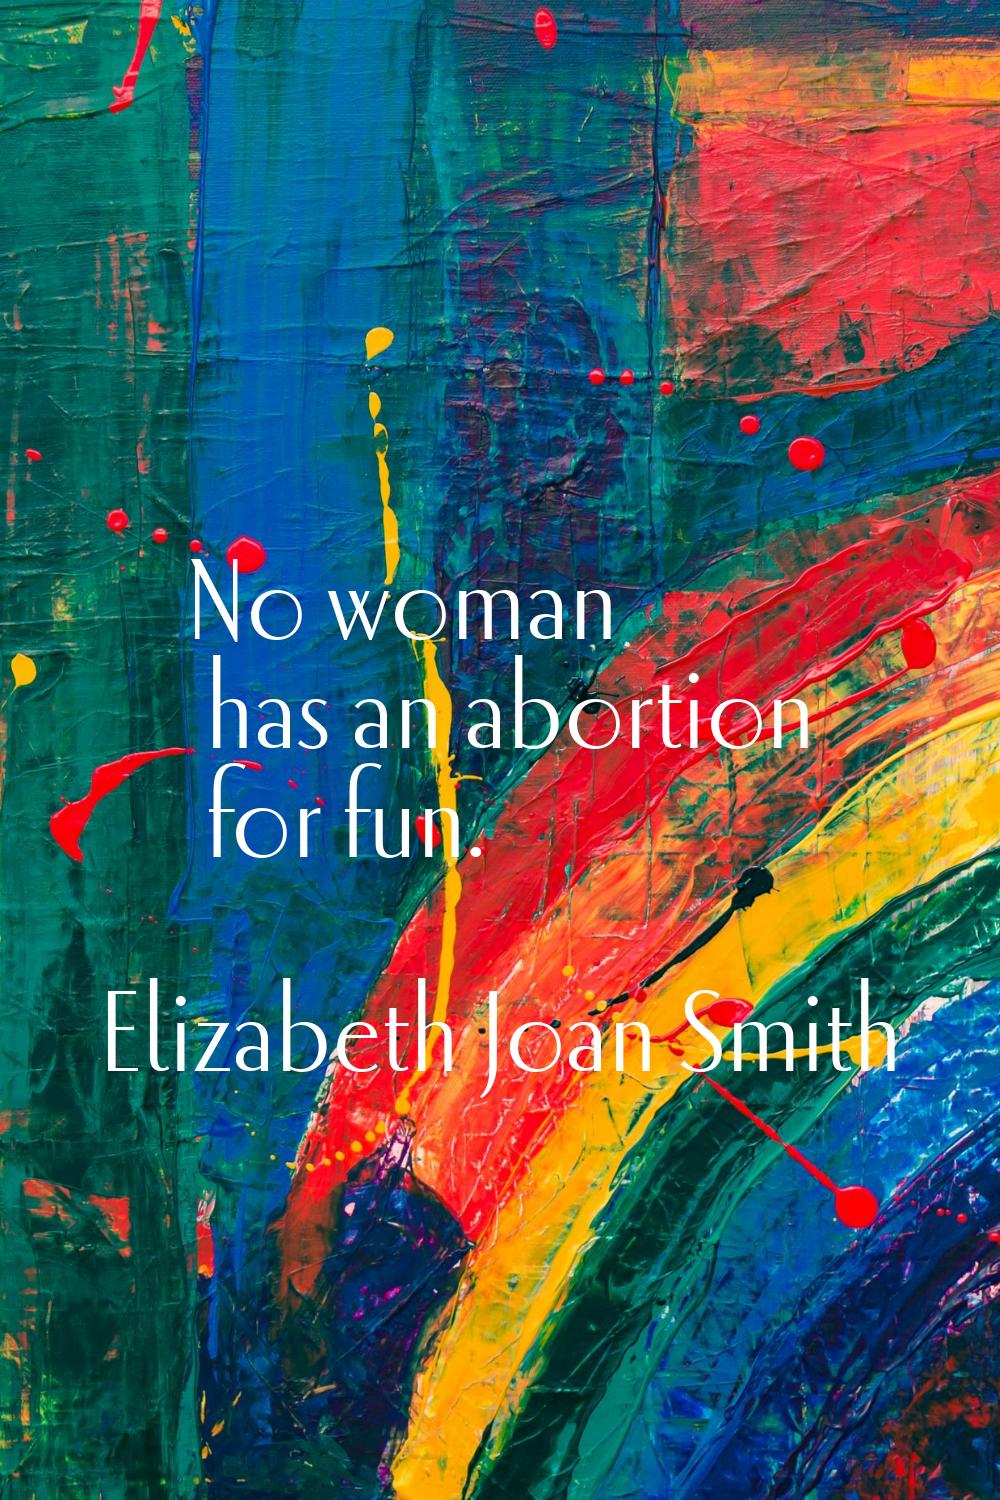 No woman has an abortion for fun.